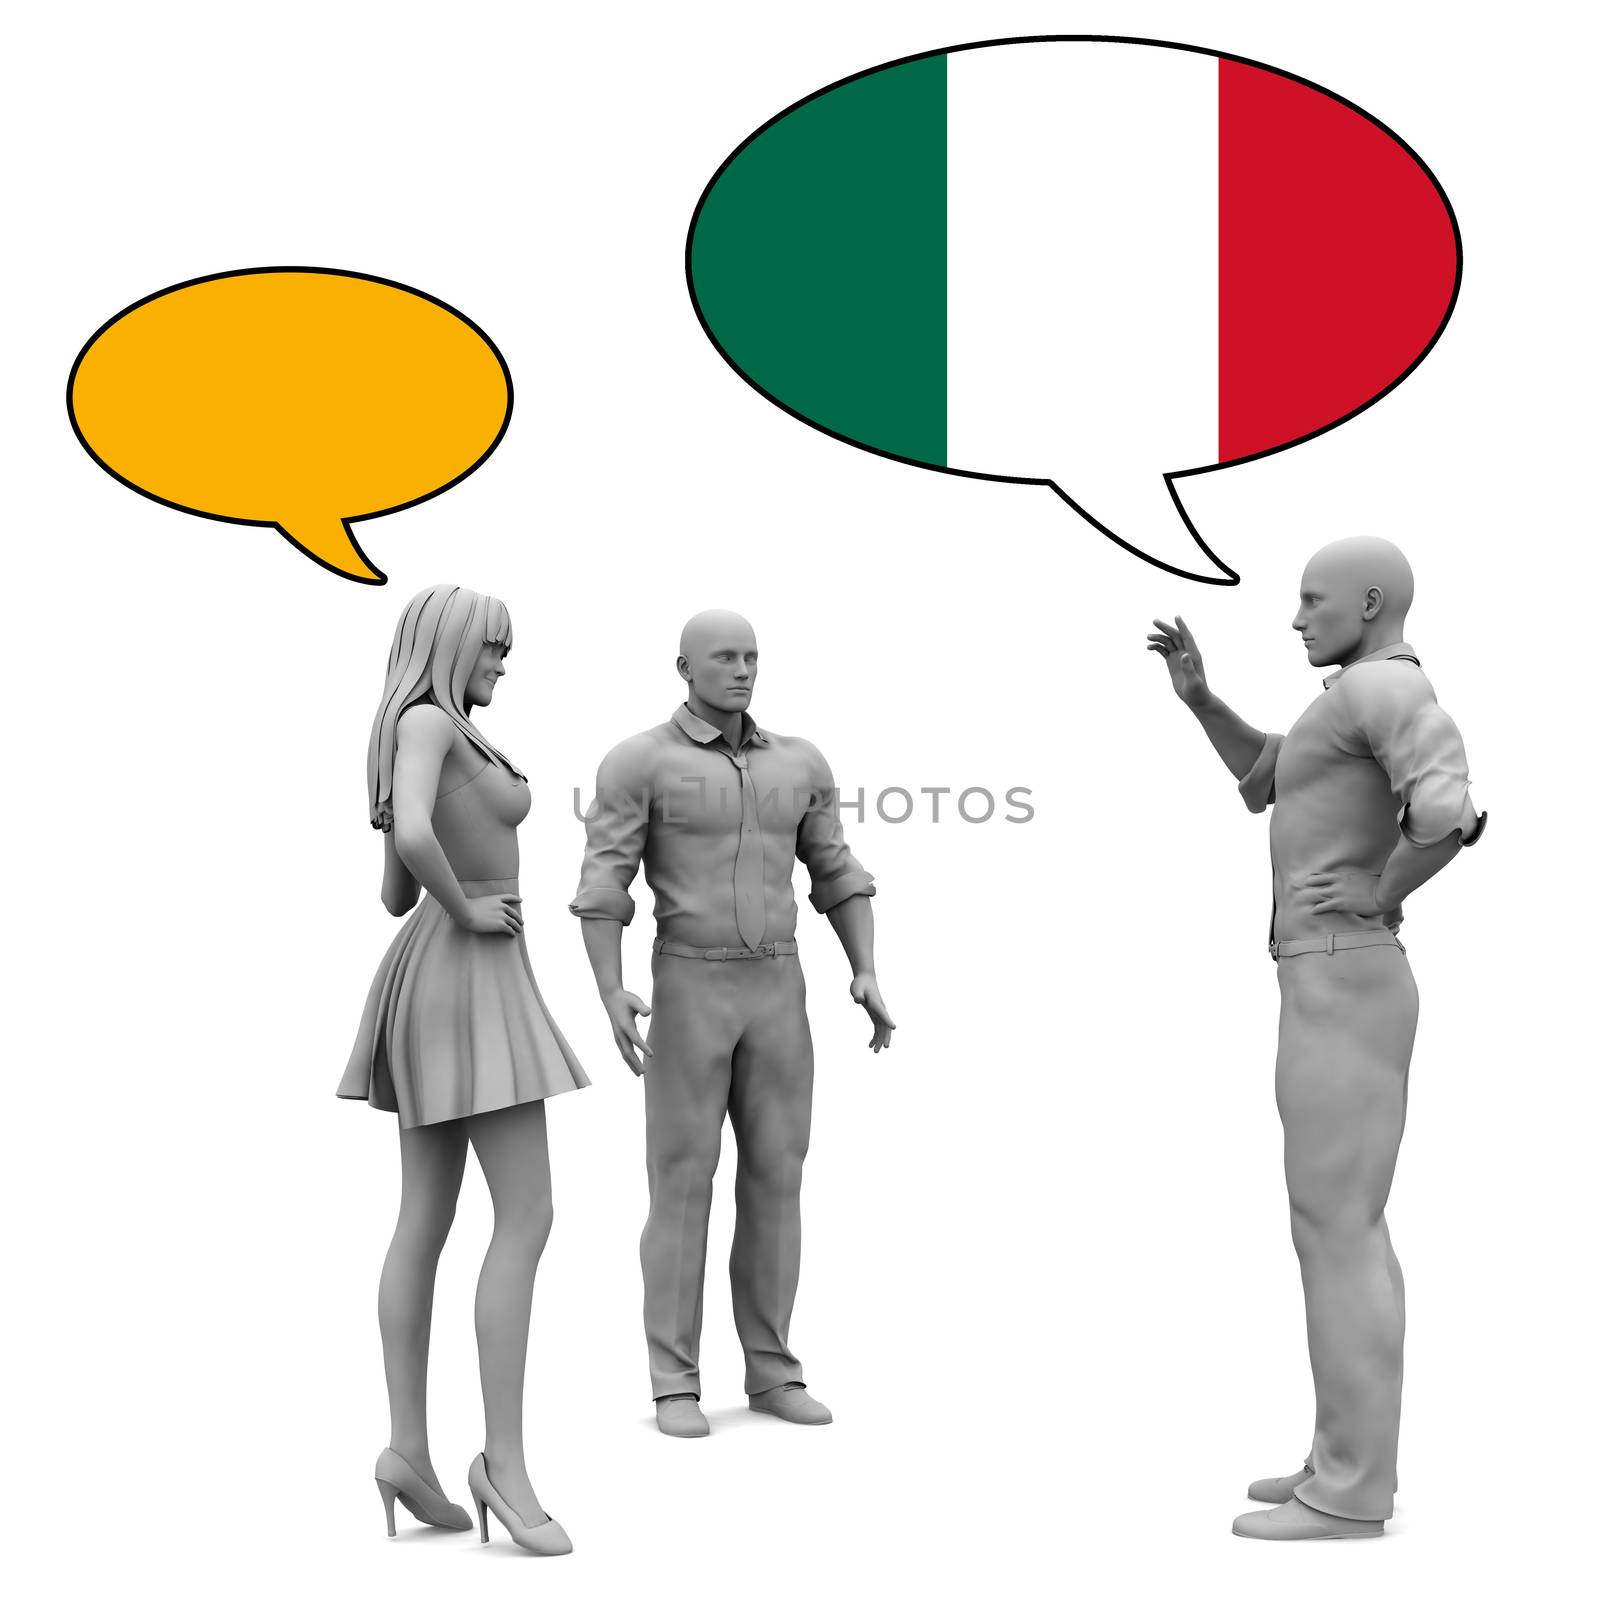 Learn Italian Culture and Language to Communicate